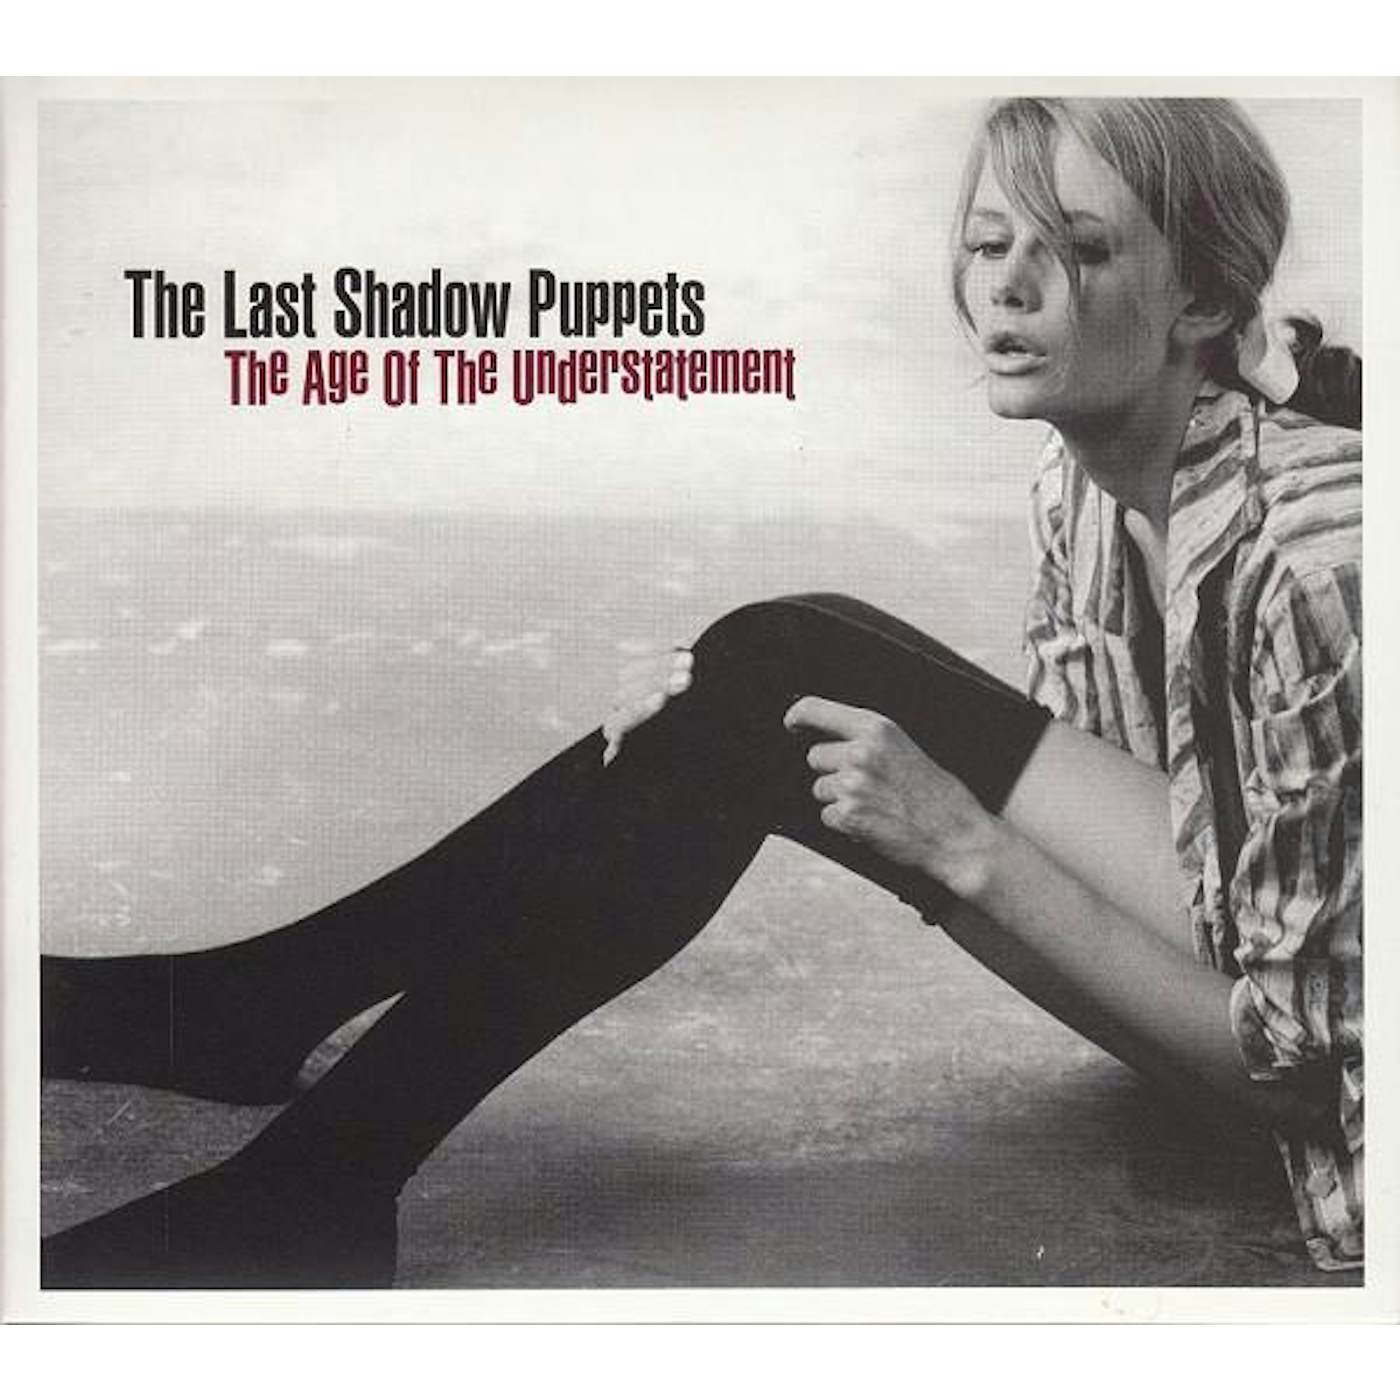 The Last Shadow Puppets AGE OF UNDERSTATEMENT CD